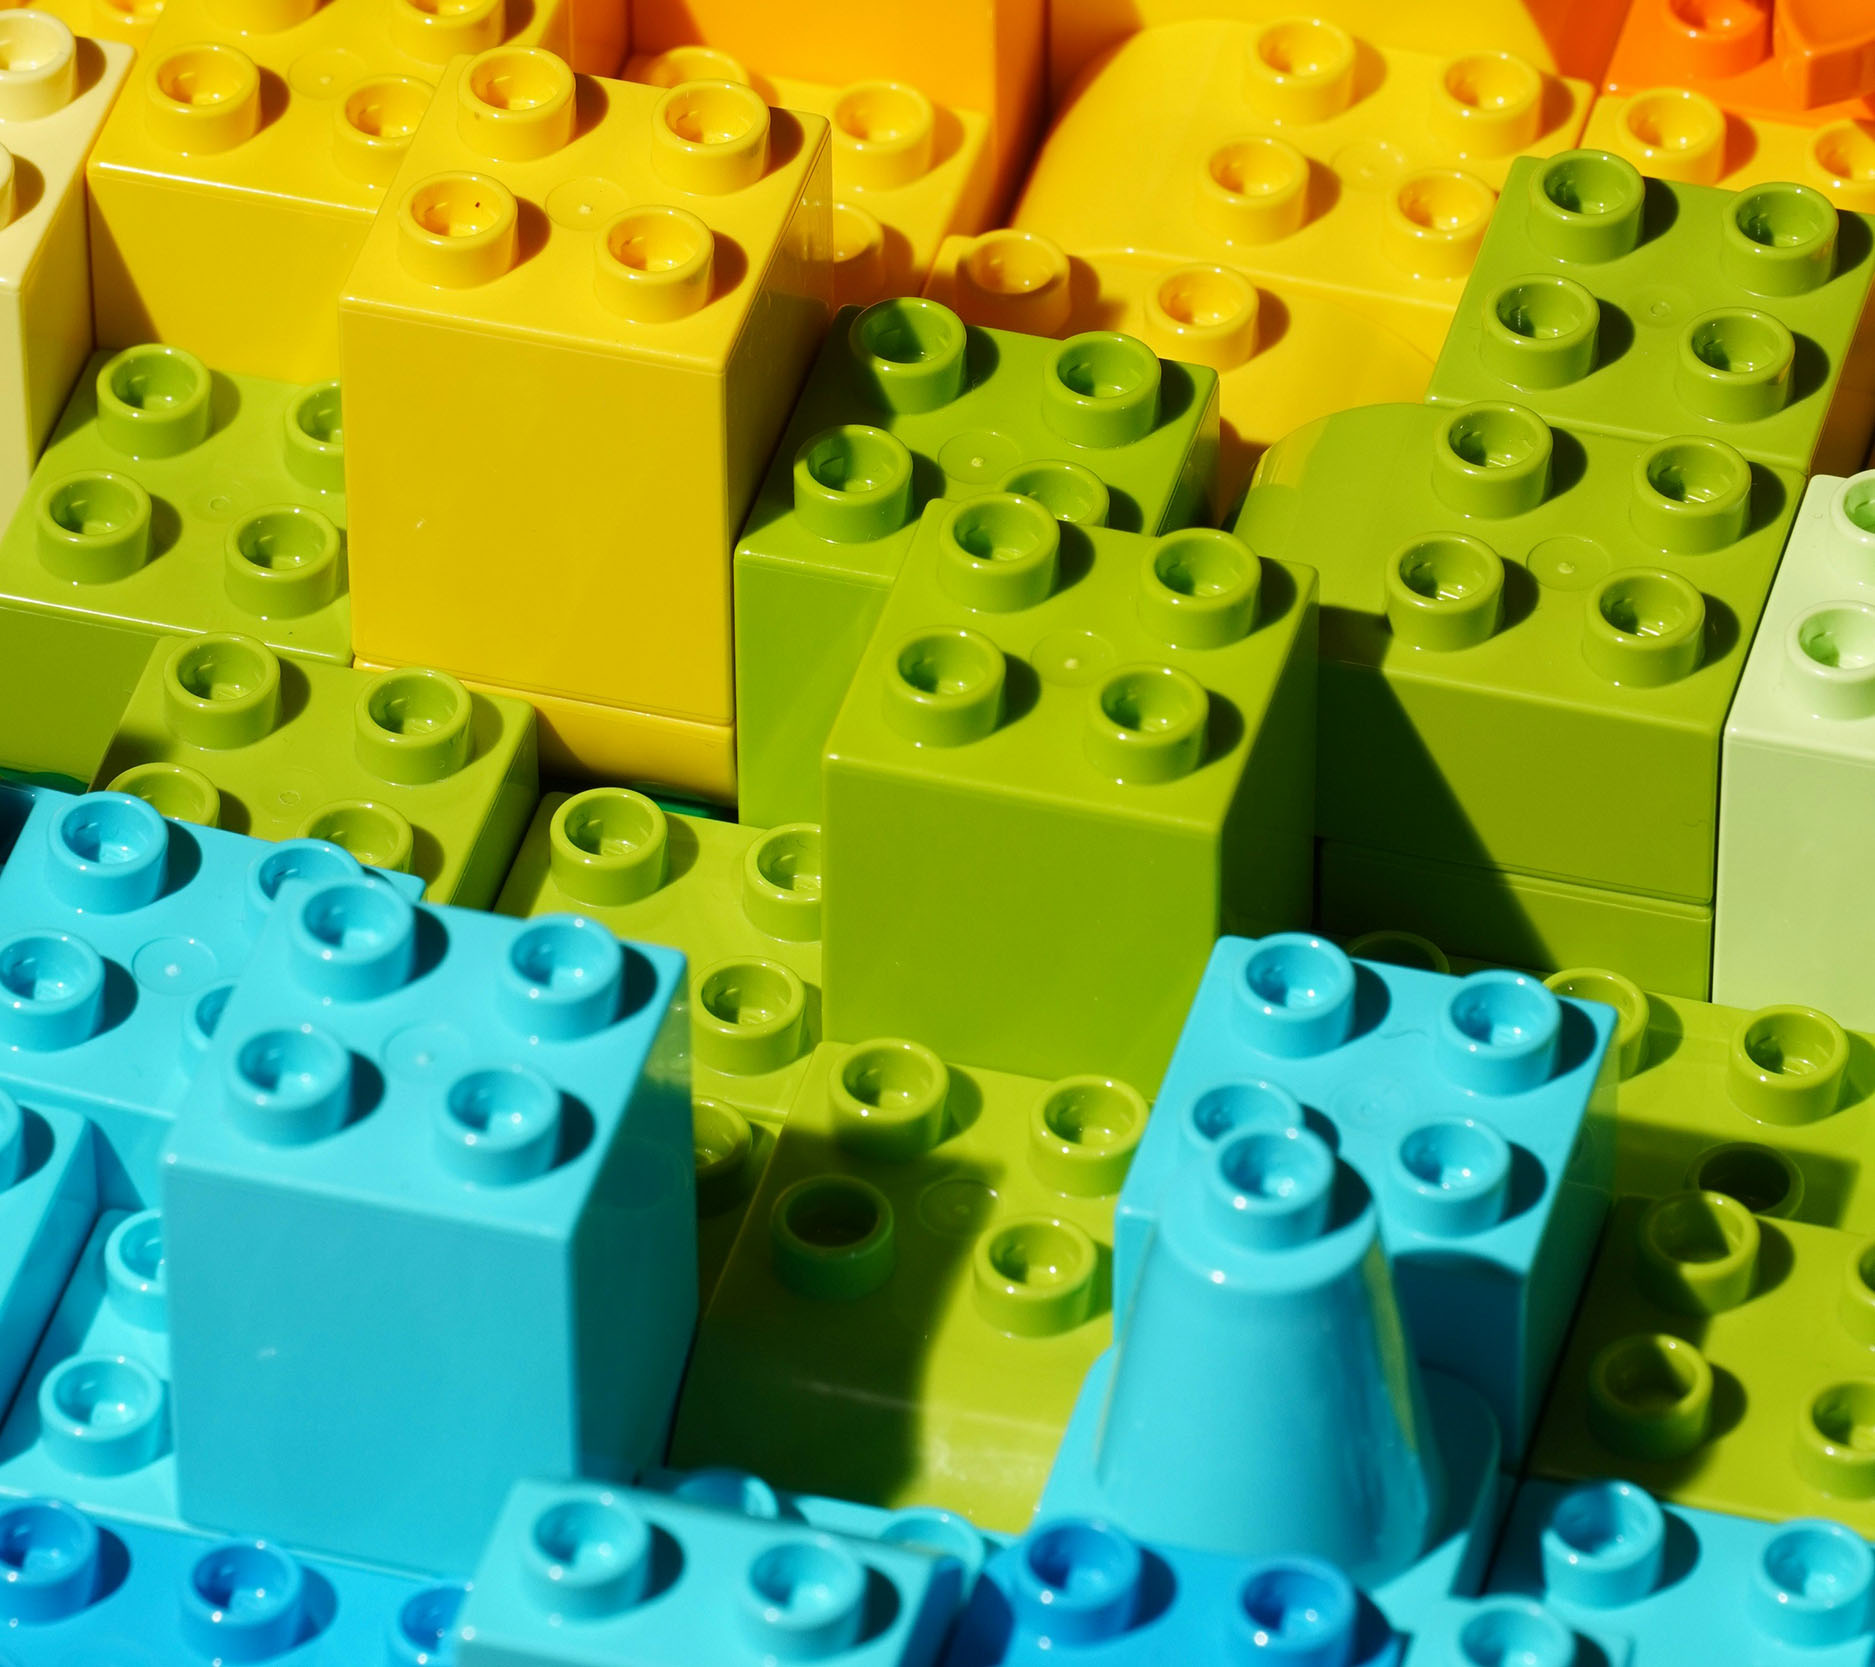 Sheaff Brock in the news, Dave Gilreath JR Humphreys publications for Medical Economics, close-up photo of brightly colored Legos stacked on top of each other